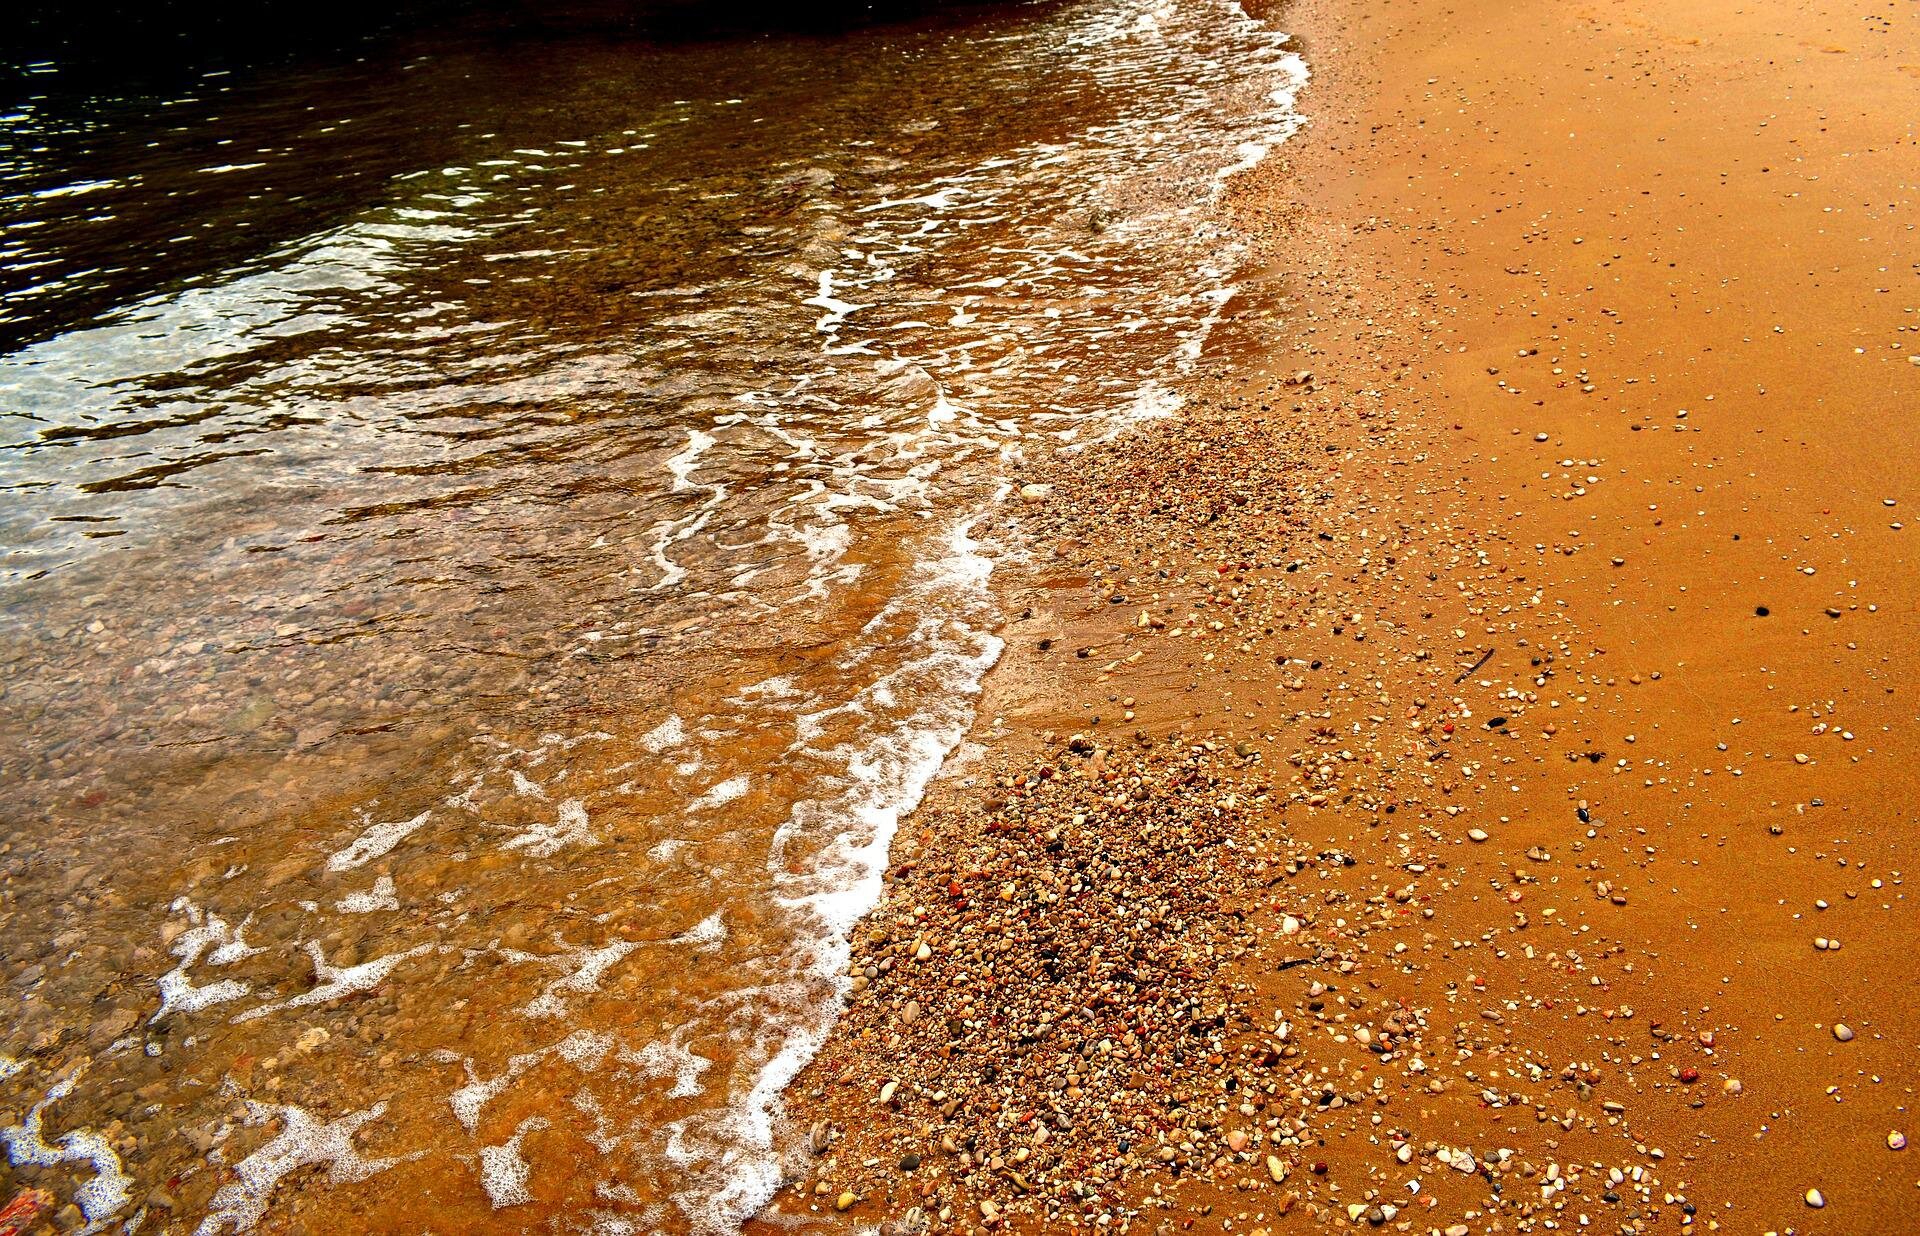 Are you heading to Florida's Gulf Coast? Beware of red tide affecting